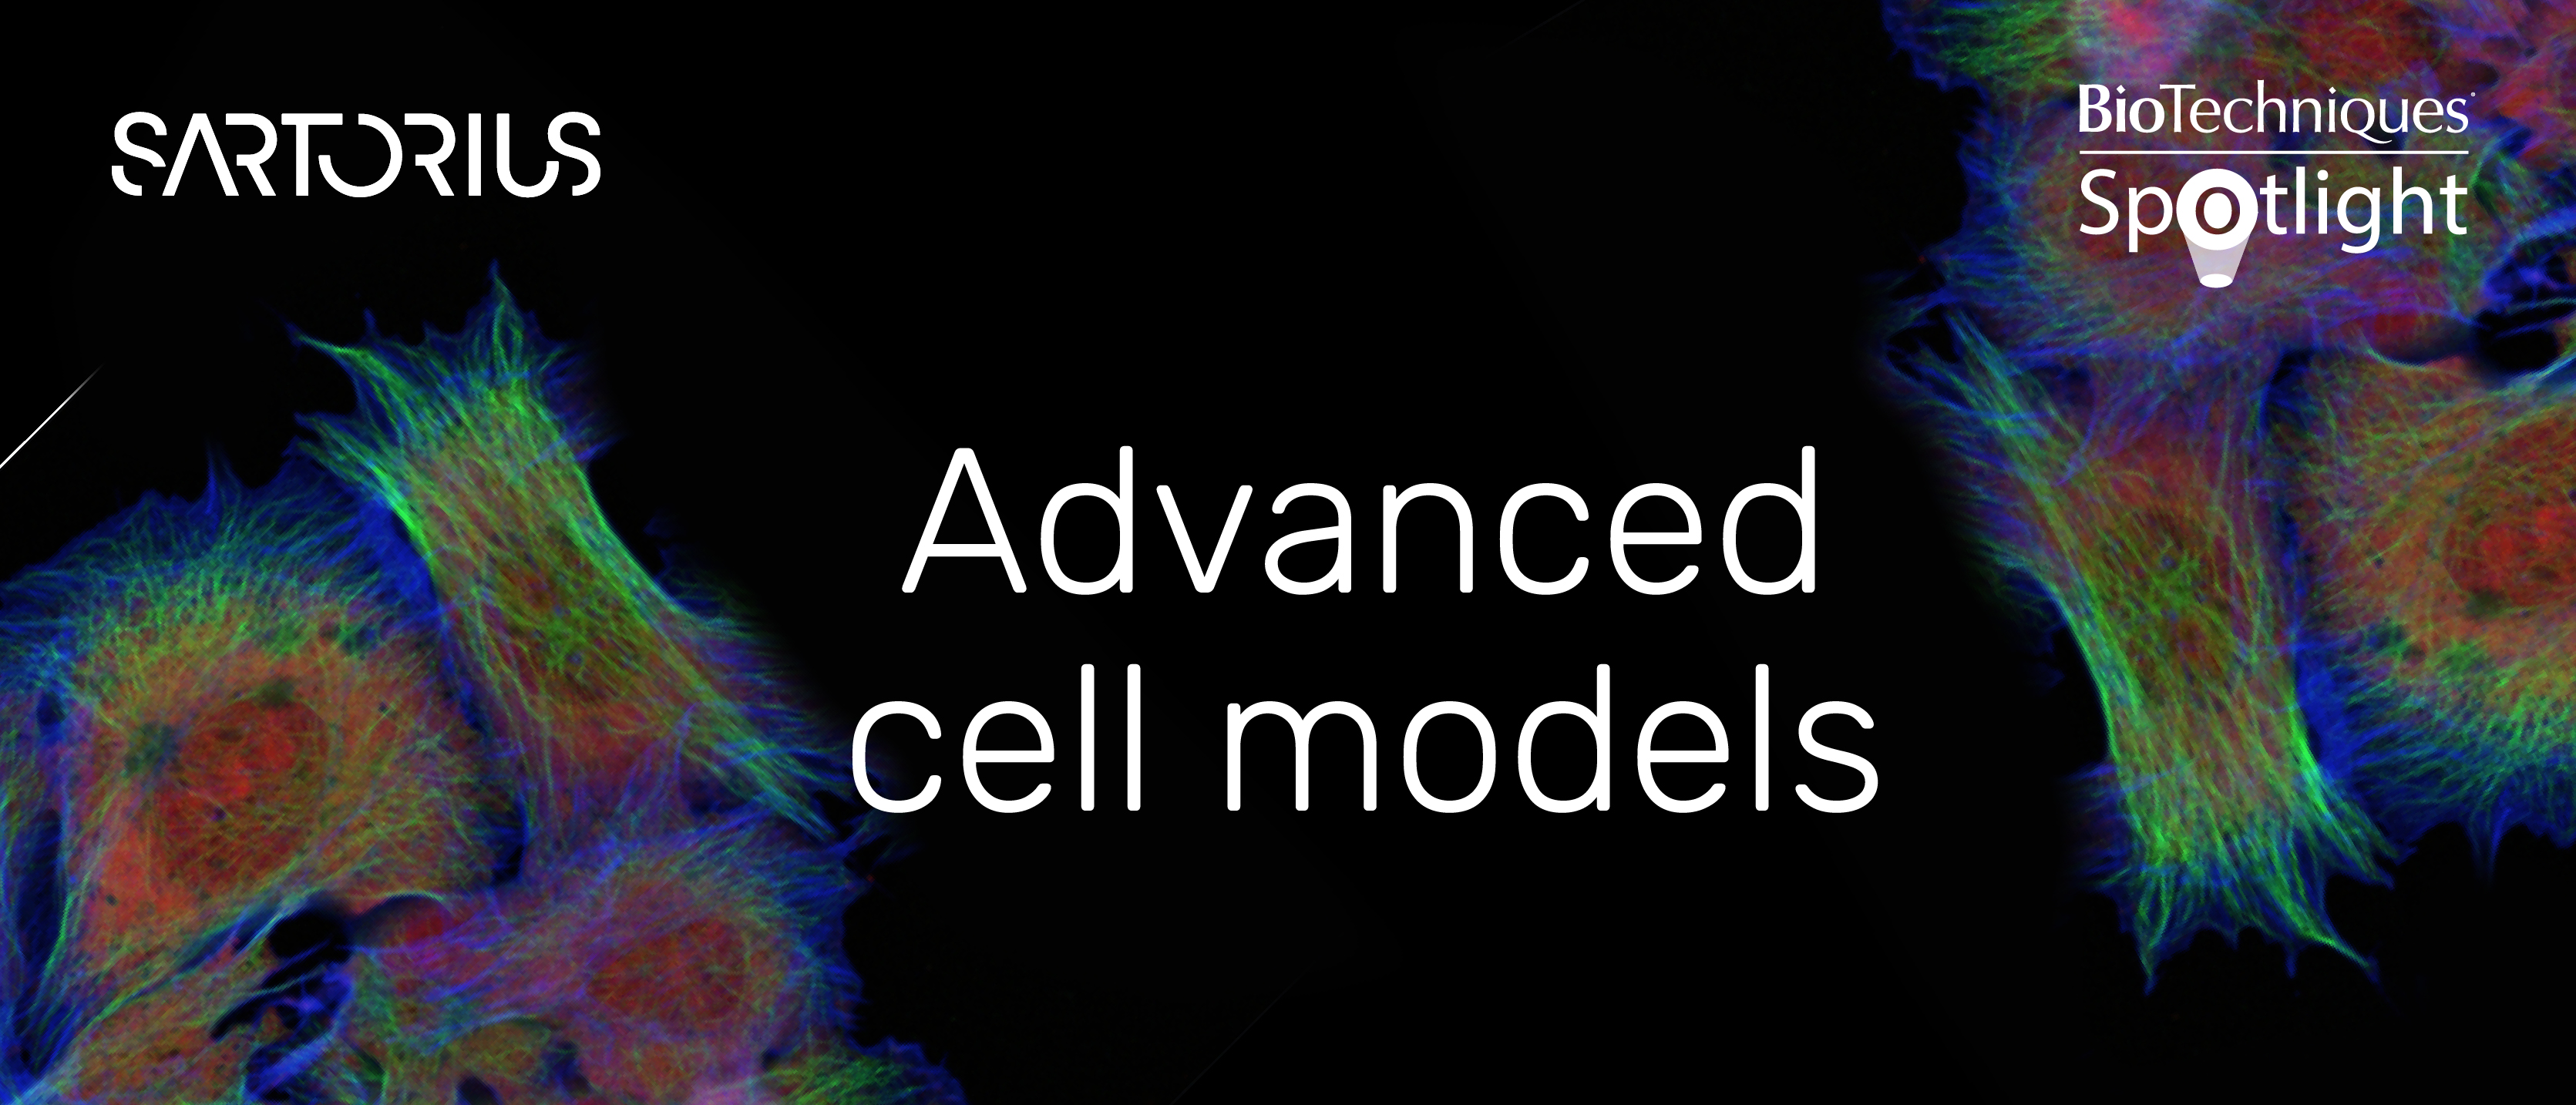 Advanced cell models